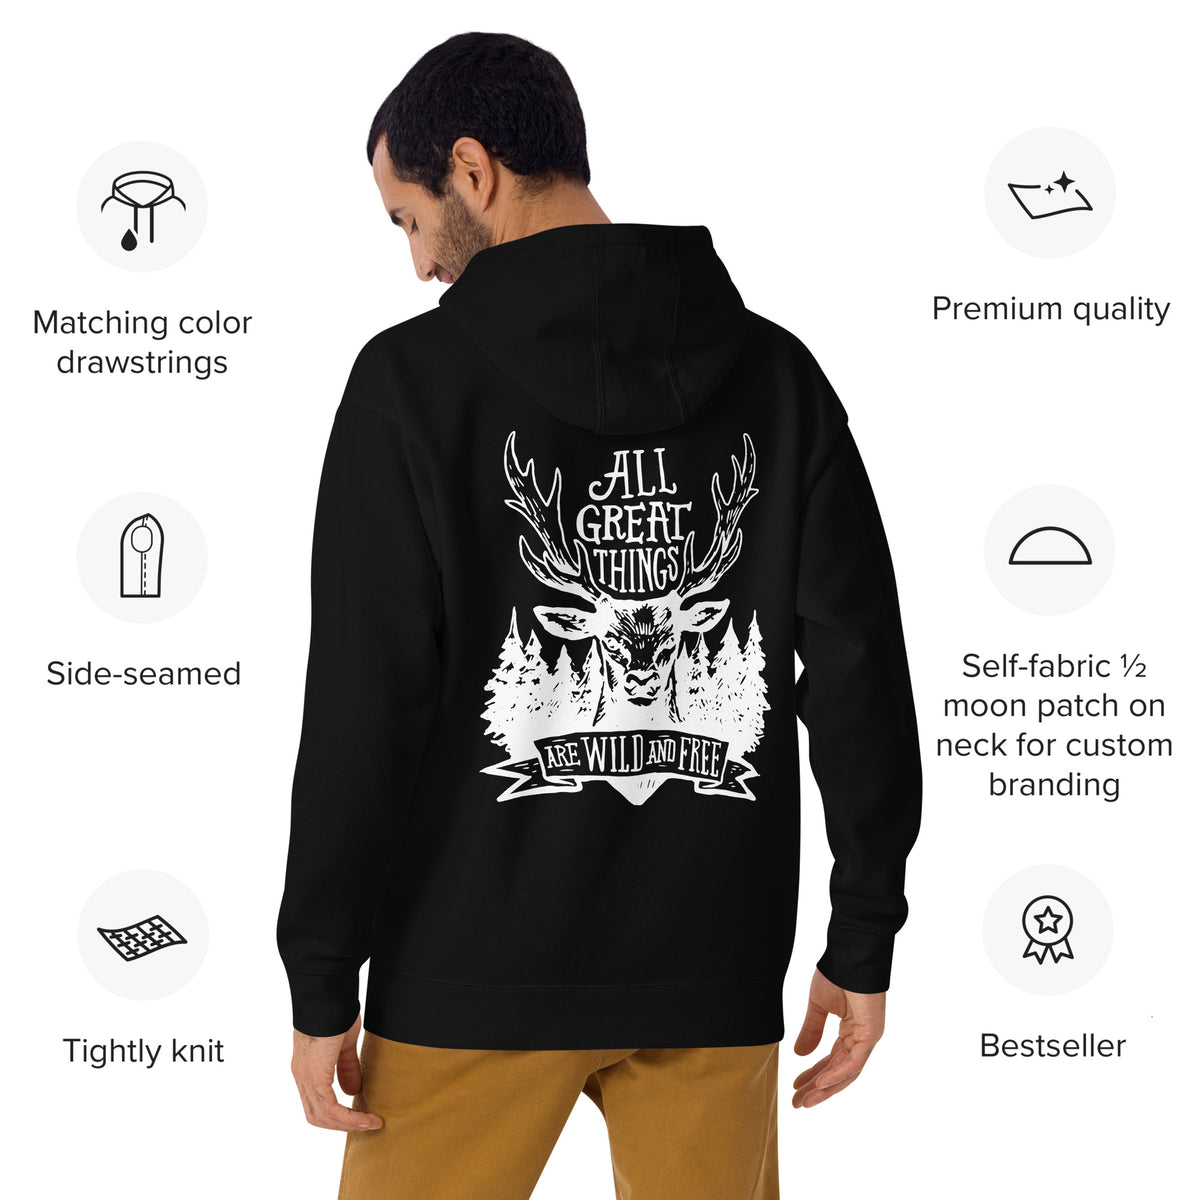 Camper Unisex-Kapuzenpullover " All Great Thinks are Wild and Free" Variante 2